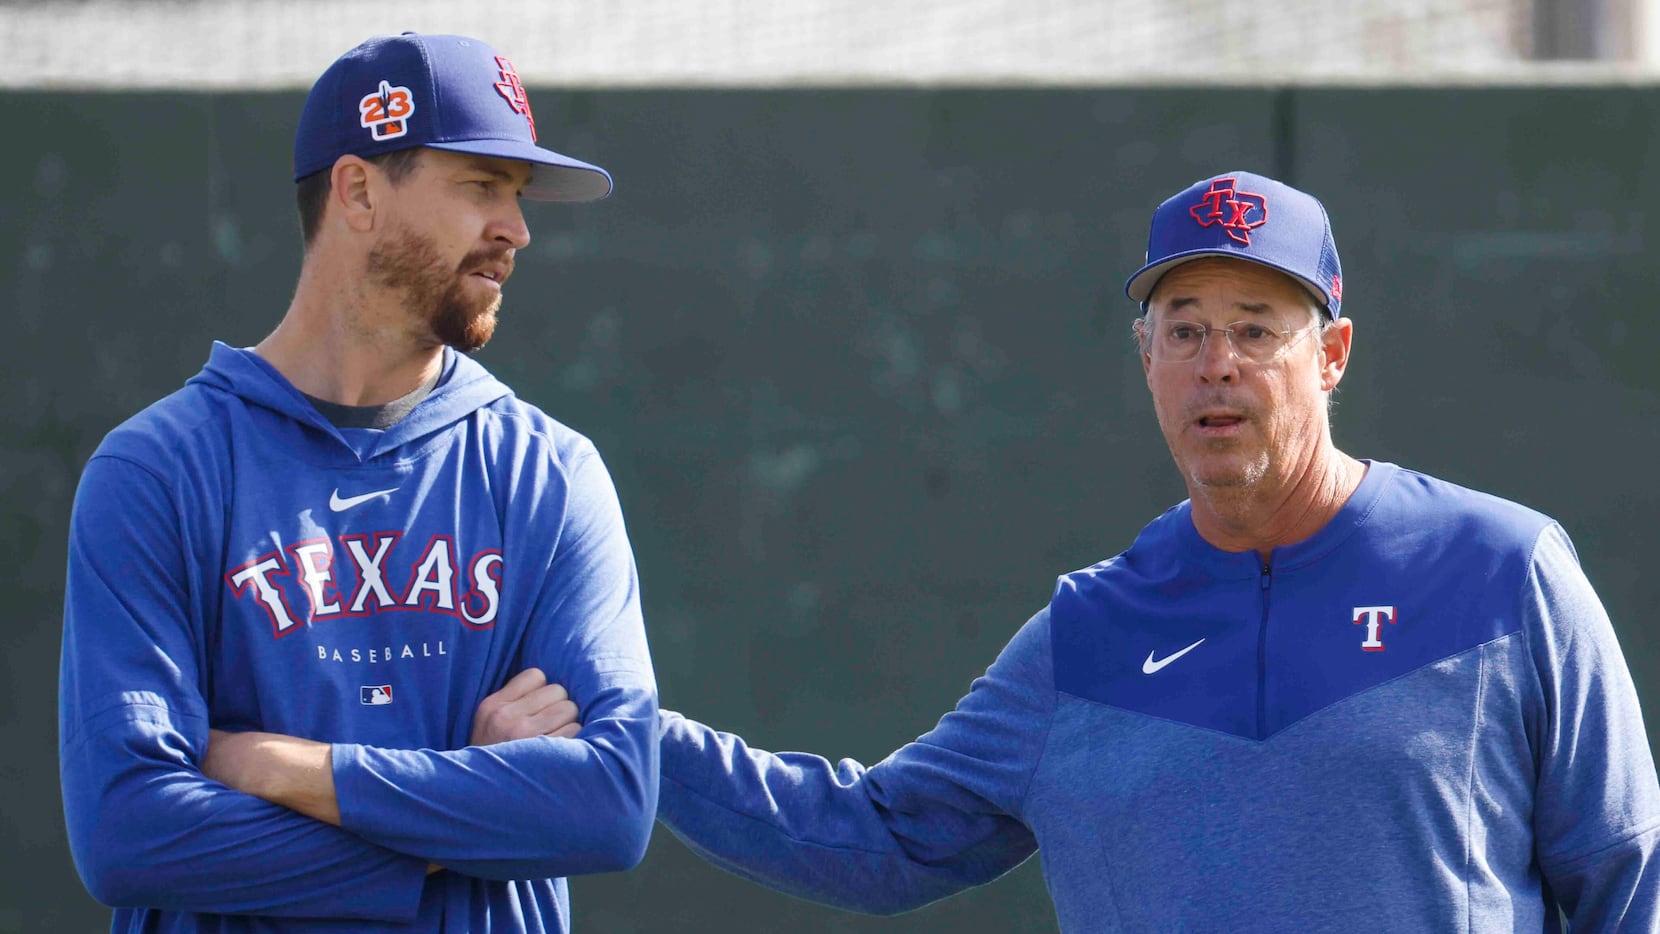 Hall of Famer Greg Maddux impressed with Rangers rotation: 'The